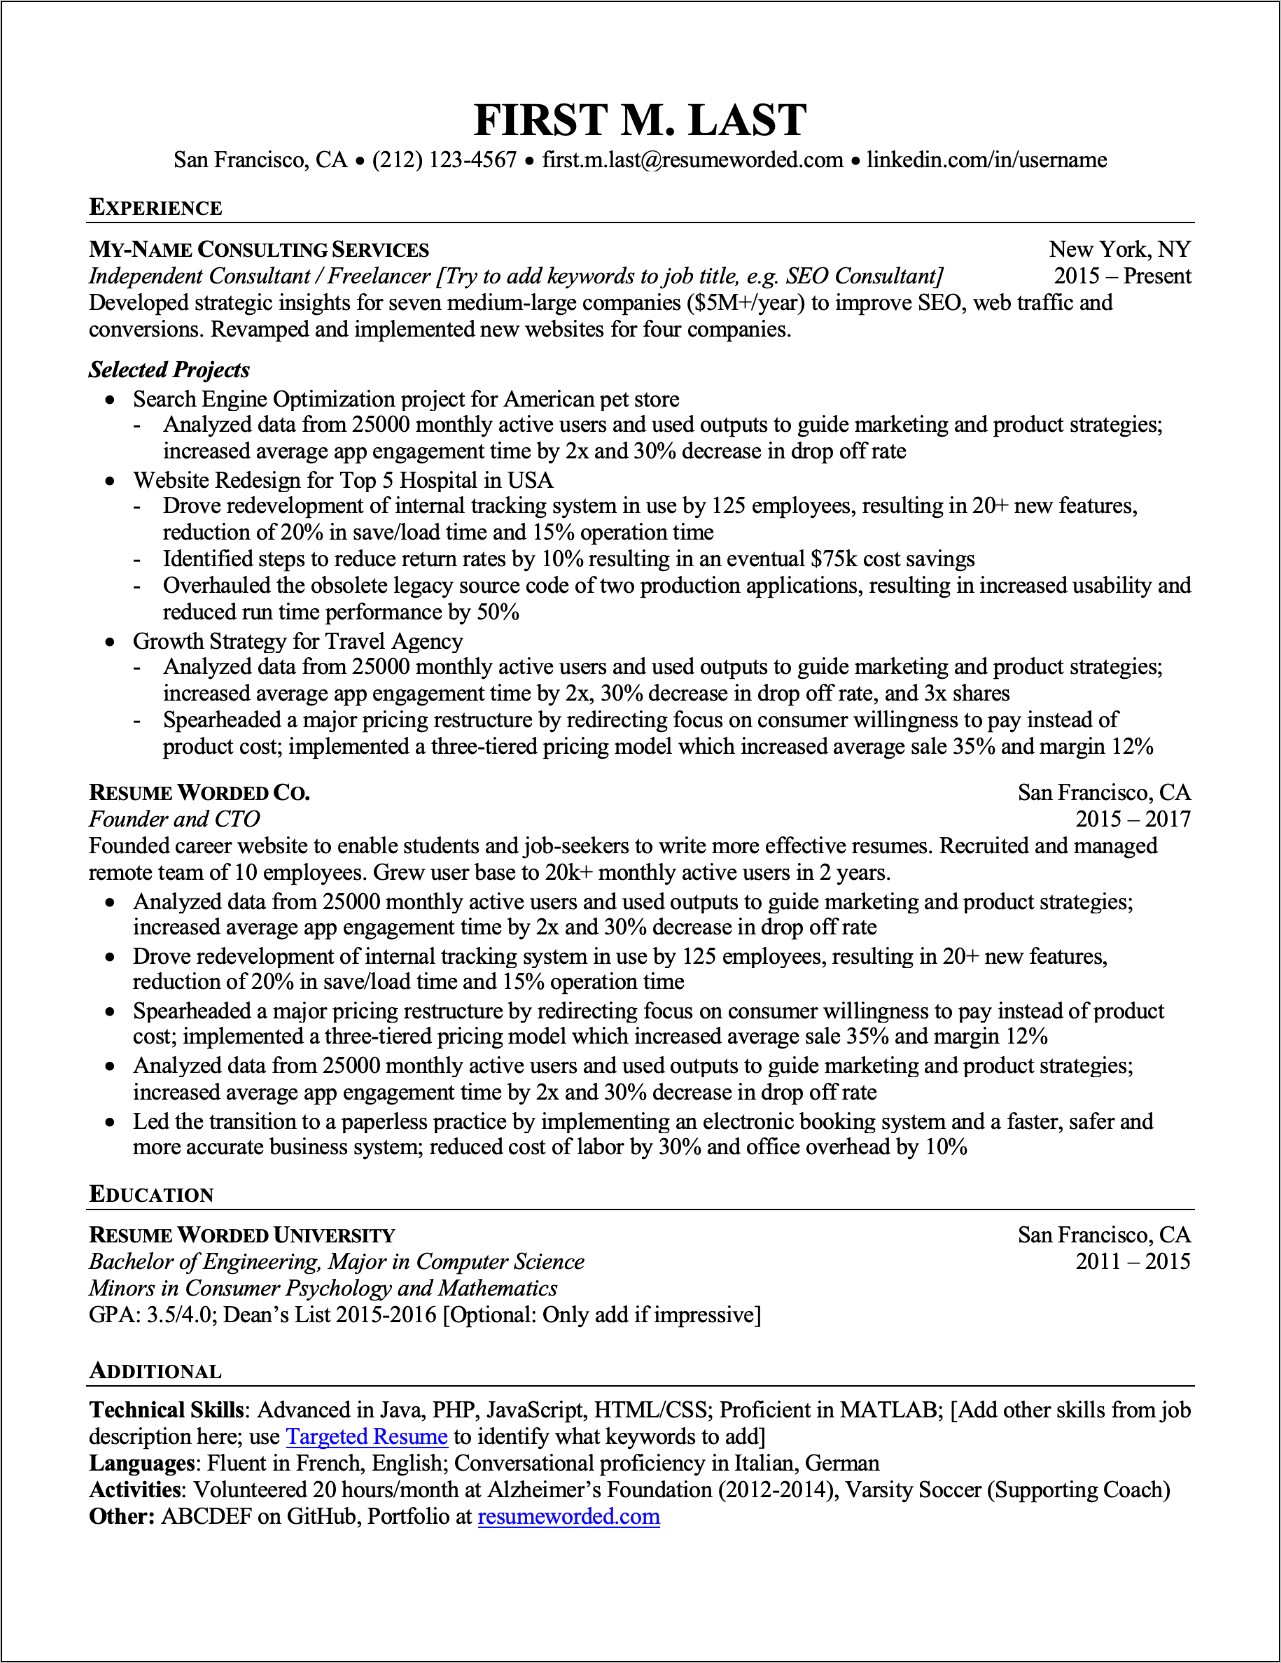 Computer Technical Skills For Resume